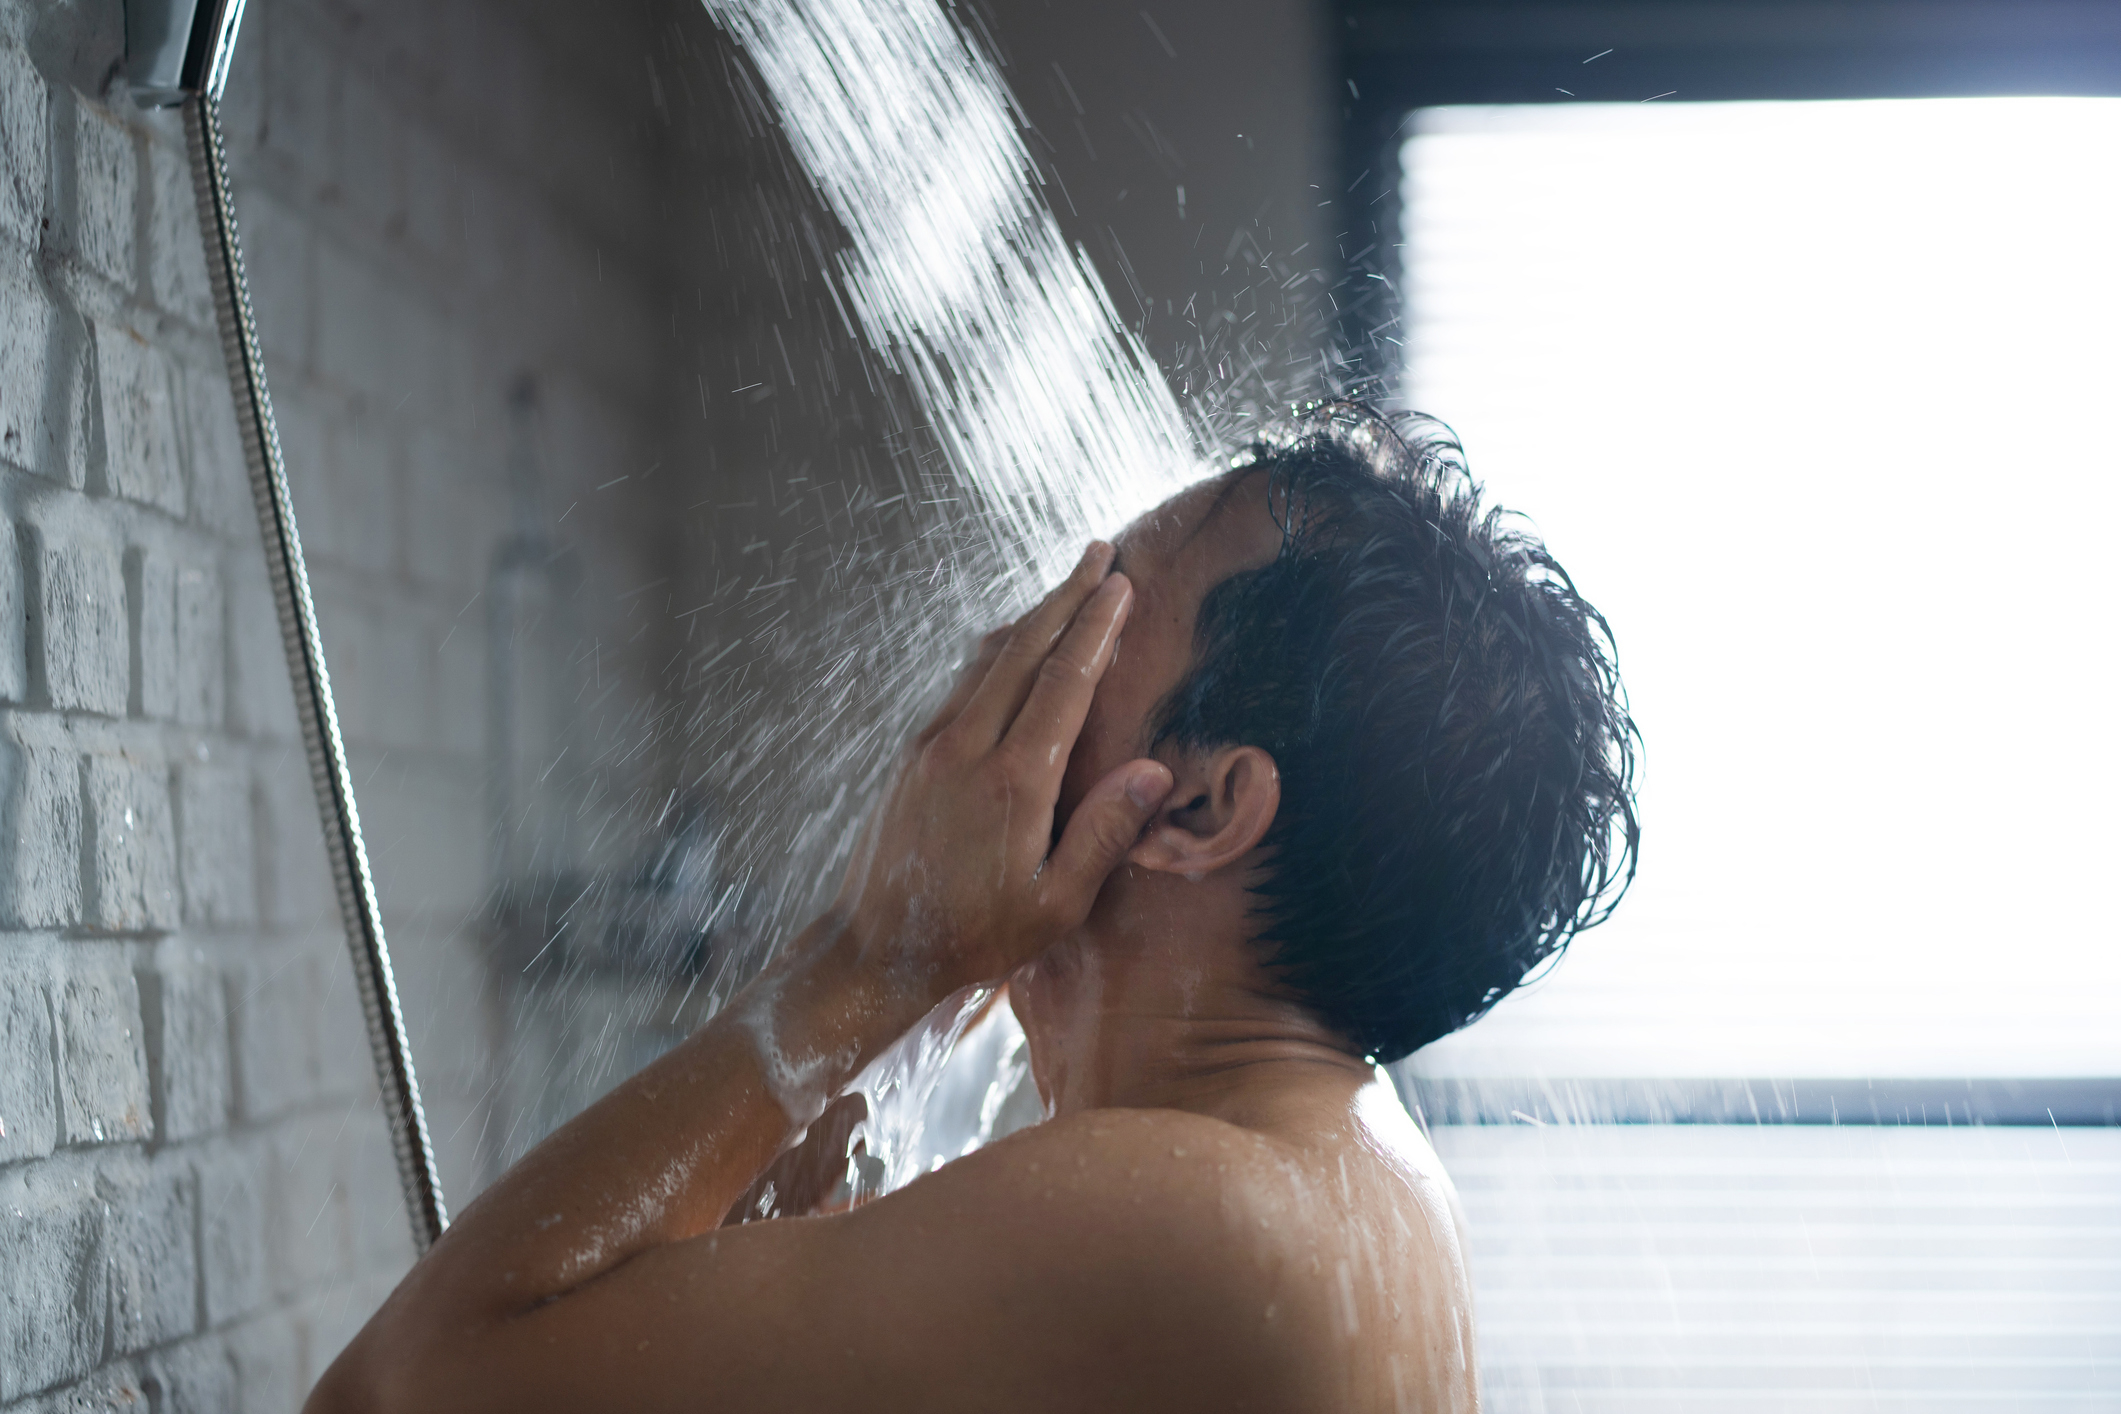 Person showering, facing away, with water flowing over them